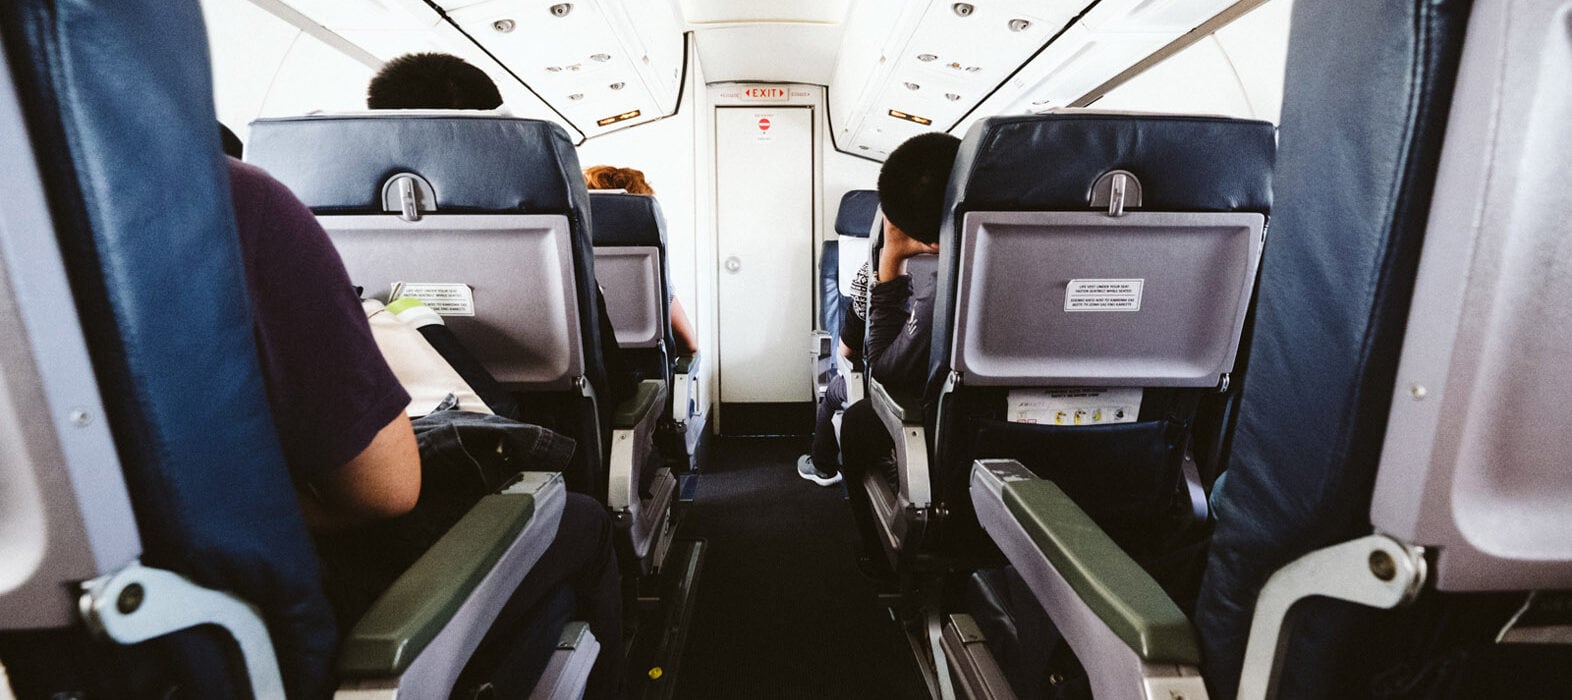 Tips for Flying: 11 Things You Should Know Before Your Flight